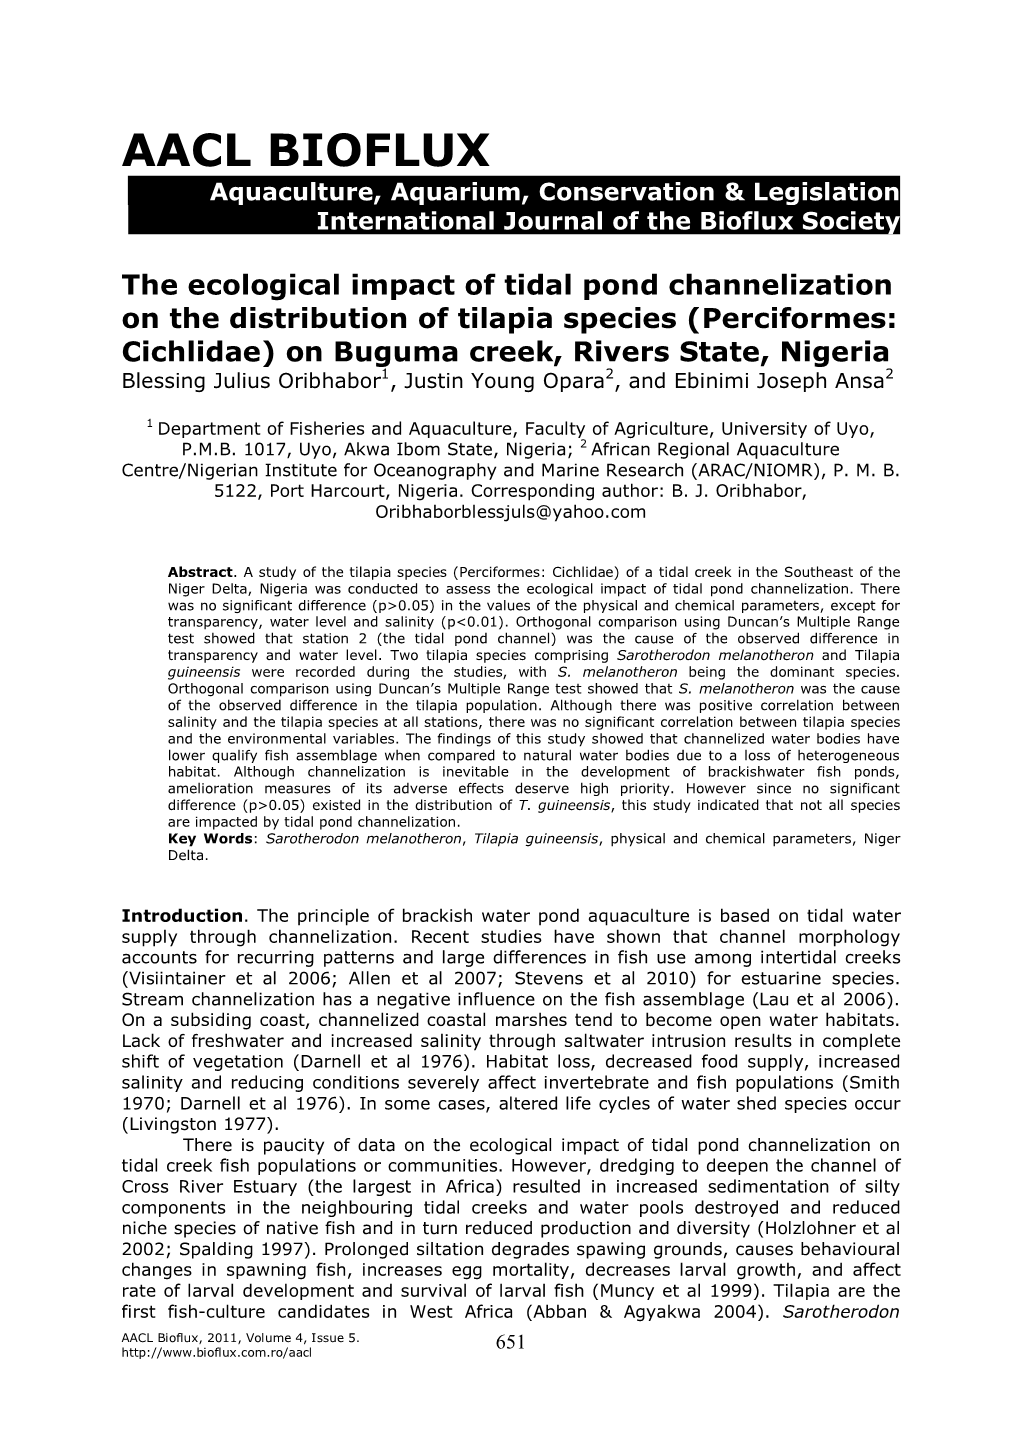 The Ecological Impact of Tidal Pond Channelization on the Distribution of Tilapia Species